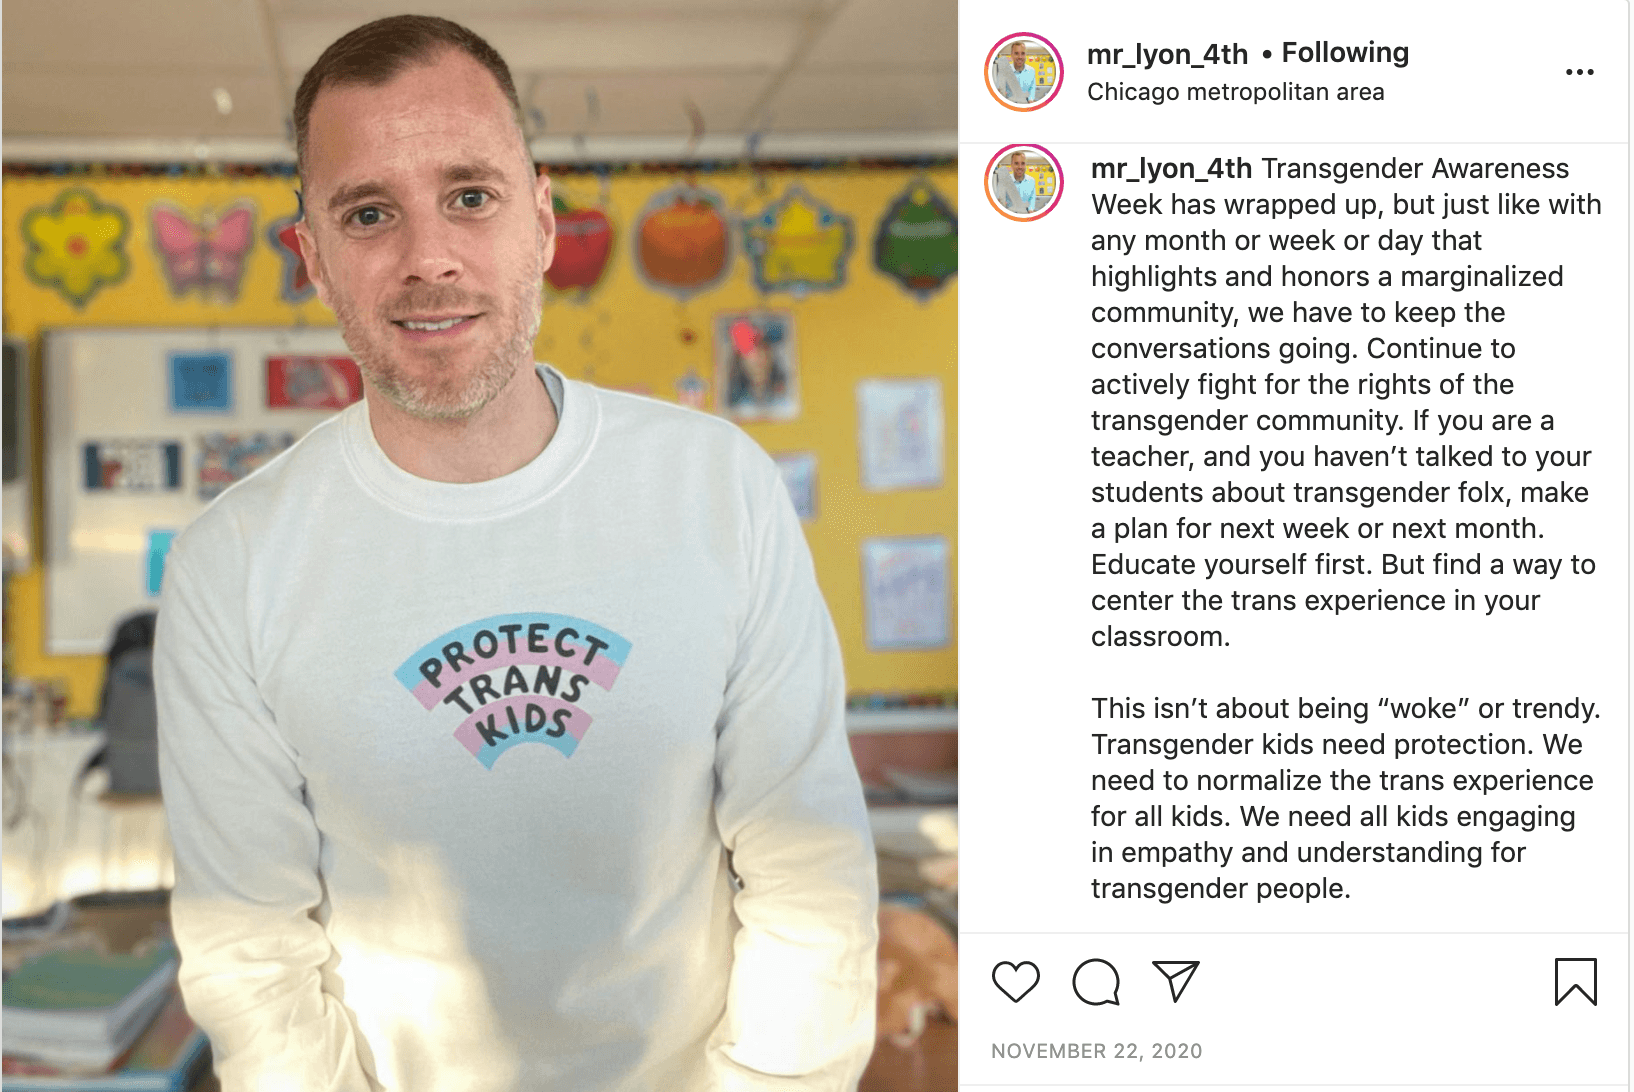 An Instagram post from Nate Lyon, showing him wearing a sweatshirt that says, "Protect Trans Kids." An excerpt from the caption says, "If you are a teachere, and you haven't talked to your students about transgender folx, make a plan for next week or next month. Educate yourself first. But find a way to center the trans experience in your classroom. This isn't about being 'woke' or trendy. Transgender kids need protection. We need to normalize the trans experience for all kids."